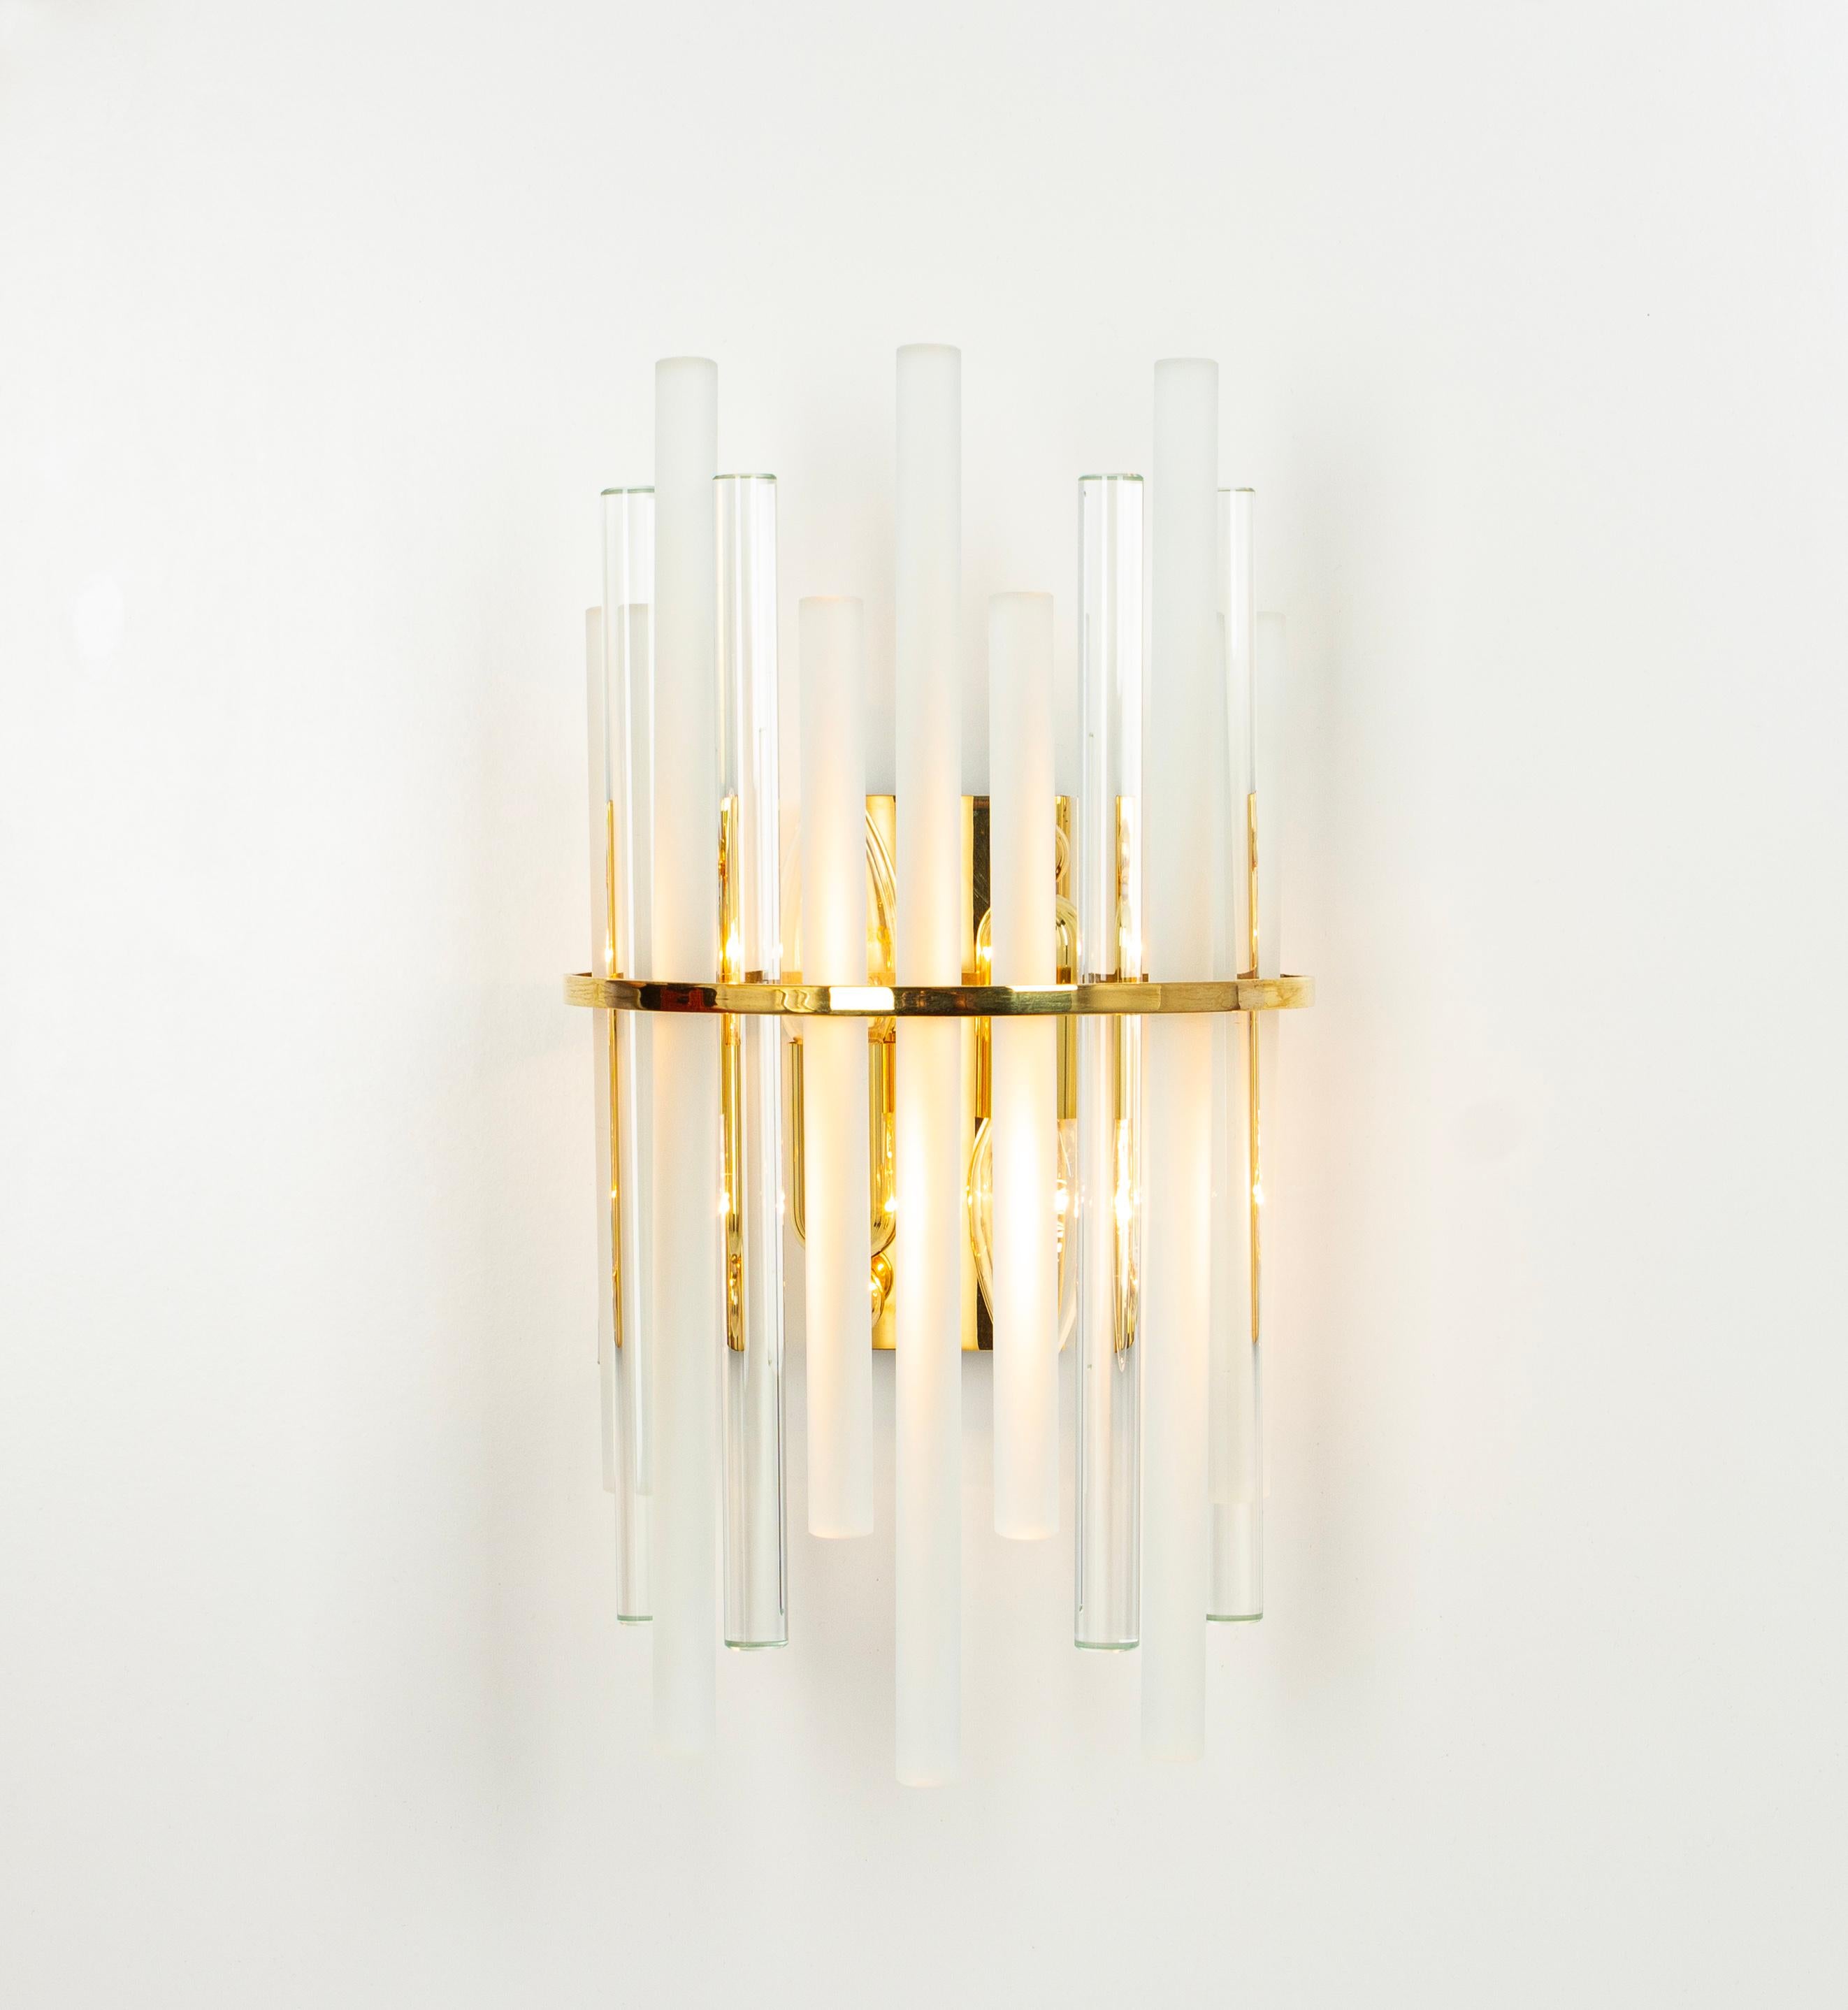 Pair of Wonderful Crystal Rods Sconces by Christoph Palme, Germany, 1970s For Sale 5